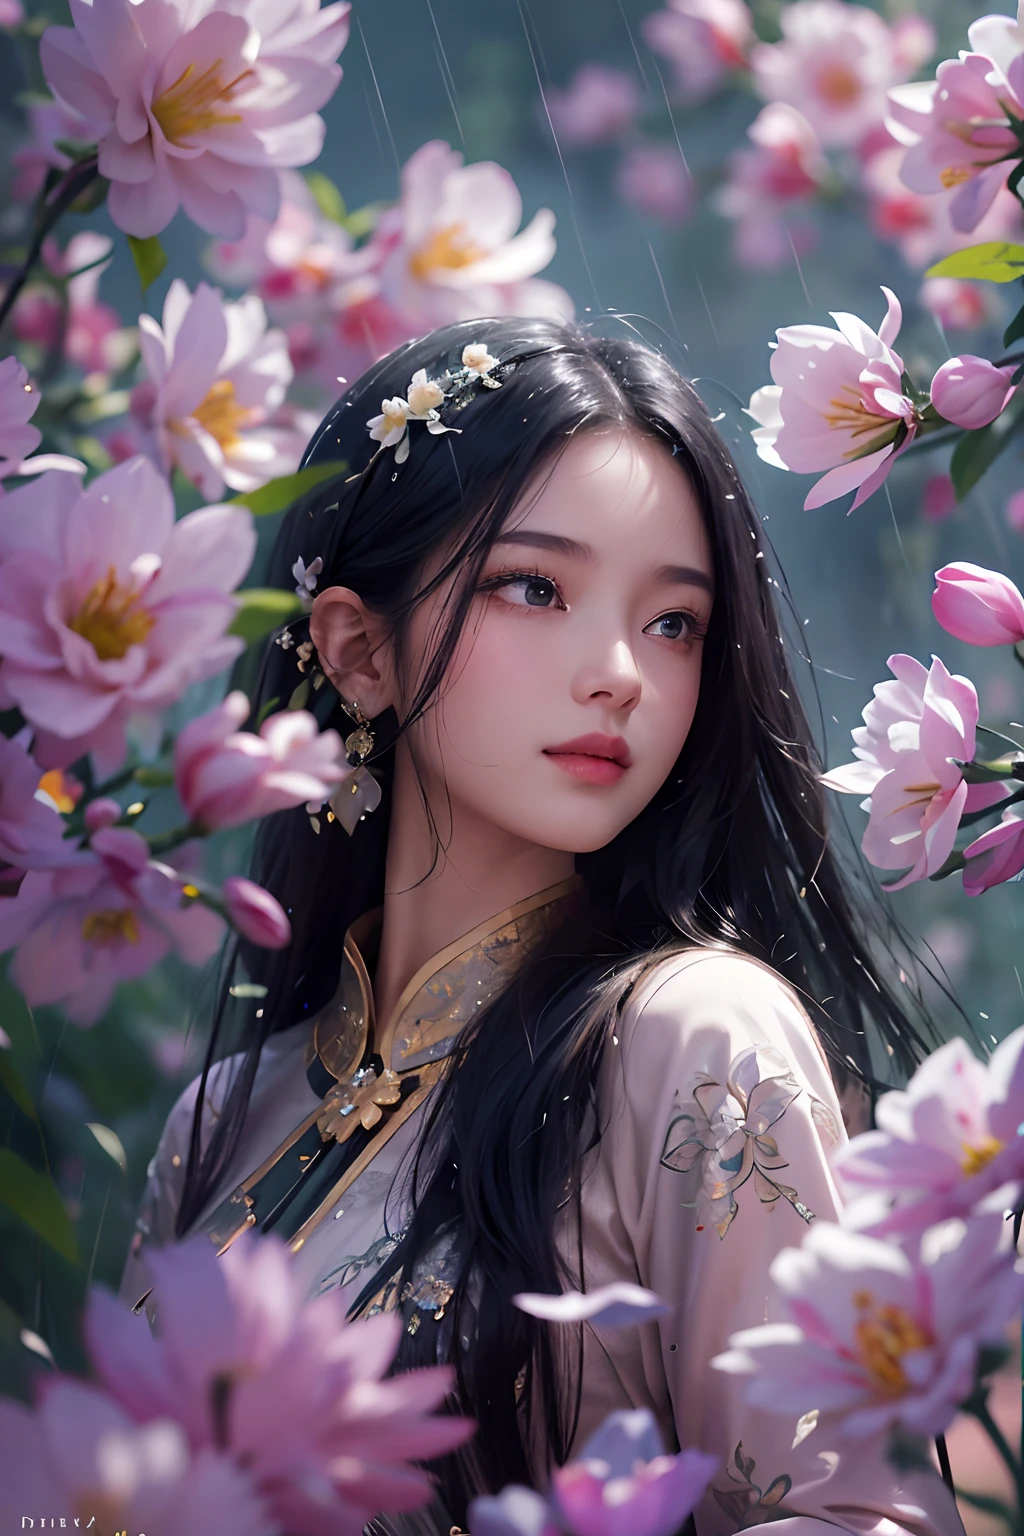 18 yo asian girl, long black hair, beautiful face, detailed eyes and lips, ao dai, standing elegantly, delicate gestures, in a lush garden with blooming flowers, rain gently falling, surrounded by mist, creating a dream-like atmosphere, creating a masterpiece, with intricate details capturing every nuance, showcasing perfect anatomy, vibrant colors illuminating the scene, ethereal lighting accentuating the girl's features, evoking a sense of joyfulness, tranquility and serenity, a ligh smile on her face.  Highly intelligent being she is.